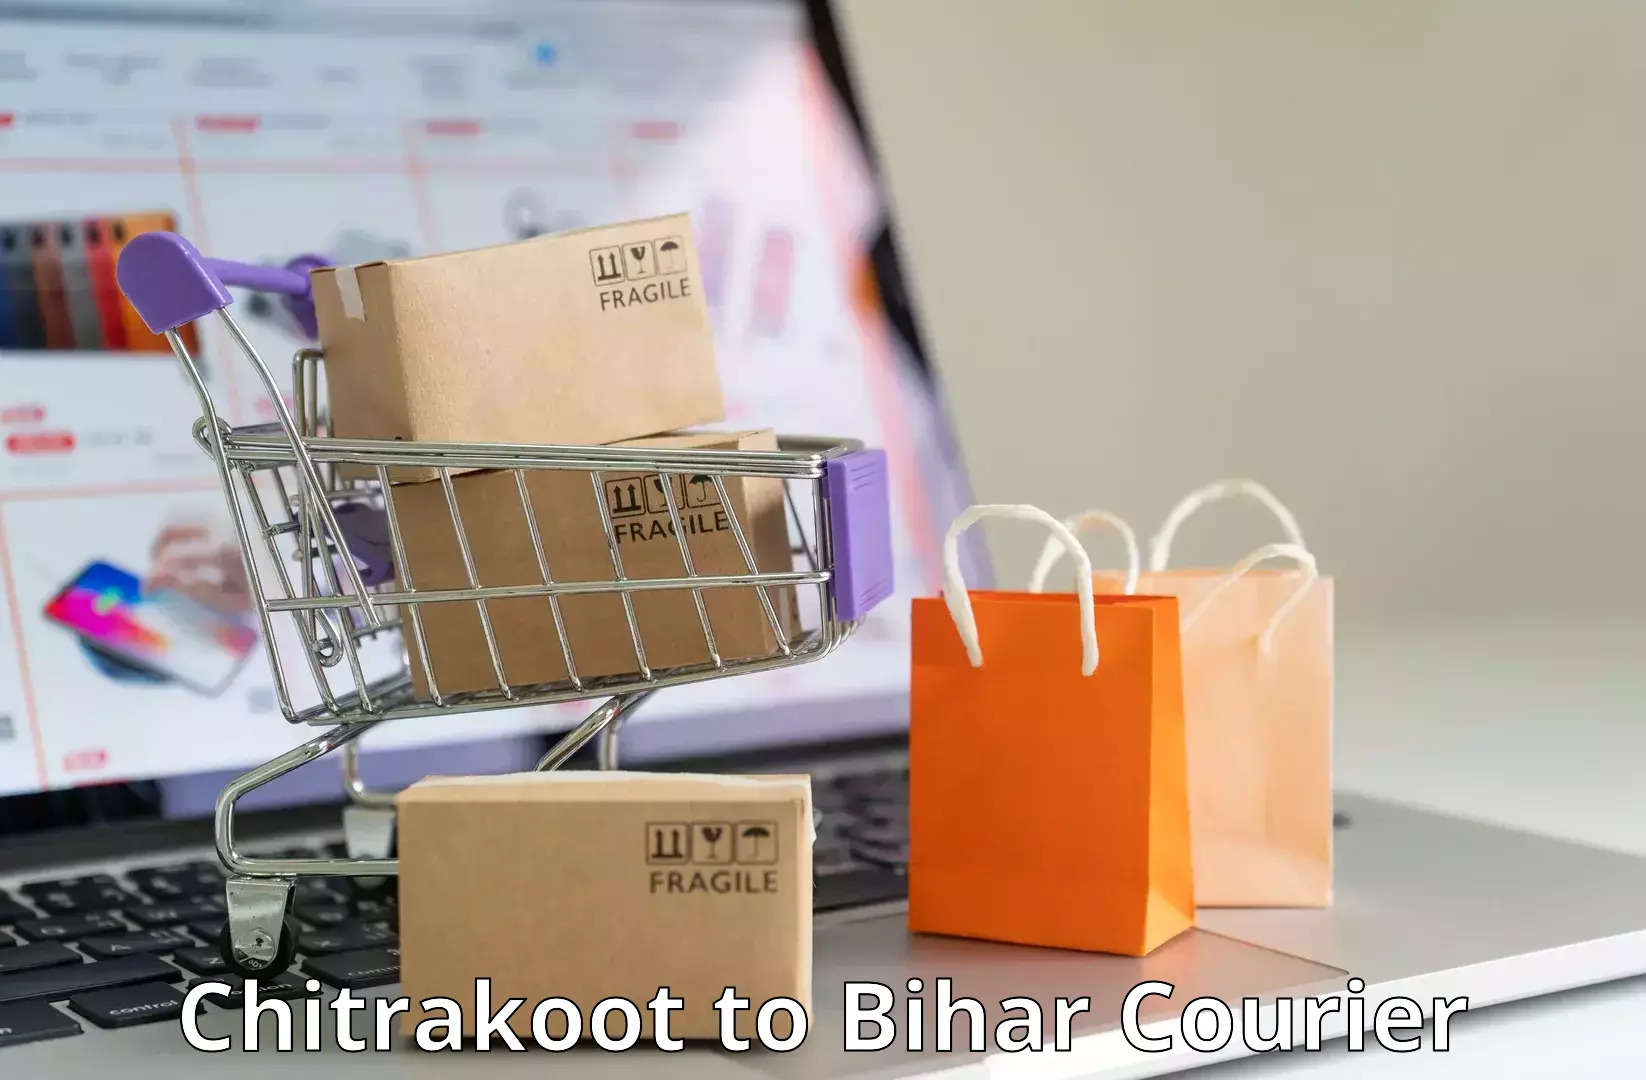 Quality courier services in Chitrakoot to Manjhaul